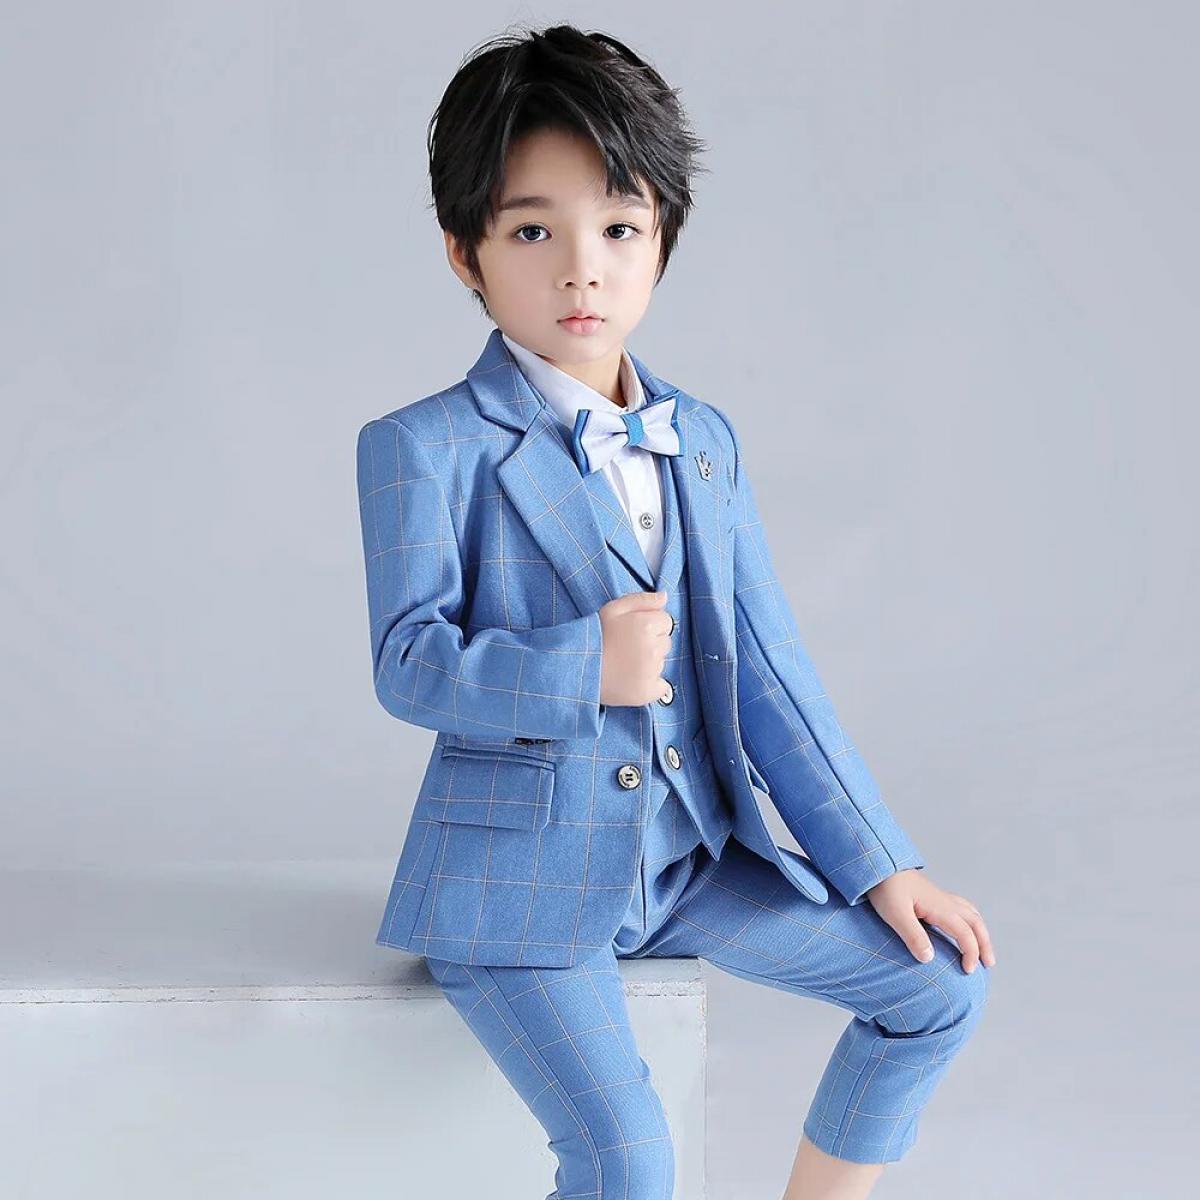 Brown Tuxedo Suit For Baby Boys And Girls Short Sleeve Formal Twinset  Clothing For Infant Party, Birthday, Wedding AA220316 From Baofu004, $32.42  | DHgate.Com